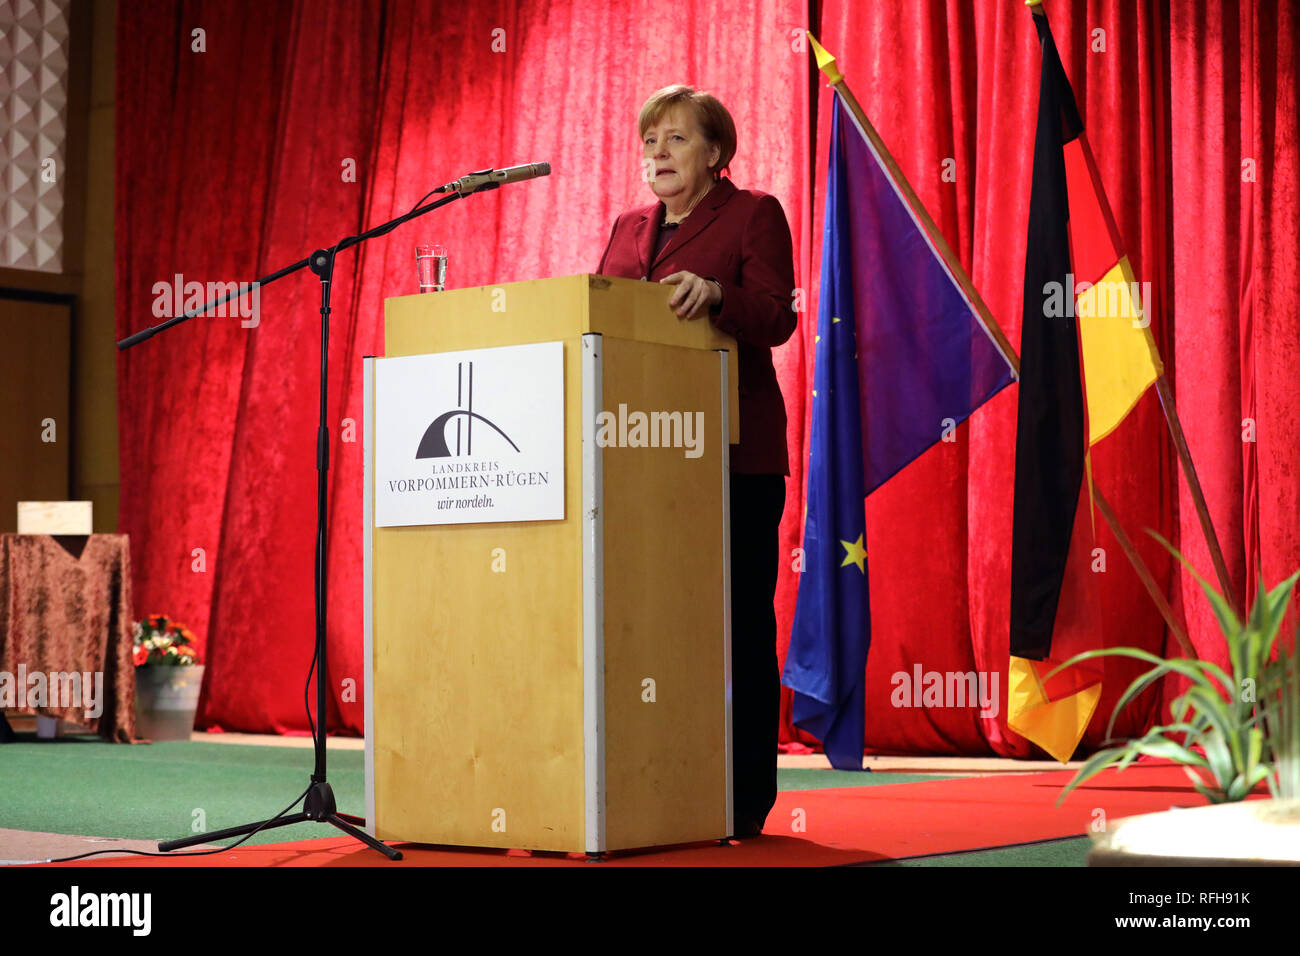 Trinwillershagen, Germany. 25th Jan, 2019. Angela Merkel (CDU), Chancellor, speaks at the traditional New Year's reception of the district of Vorpommern-Rügen. Merkel represents the constituency with a direct mandate in the Bundestag. Credit: Bernd Wüstneck/dpa/Alamy Live News Stock Photo